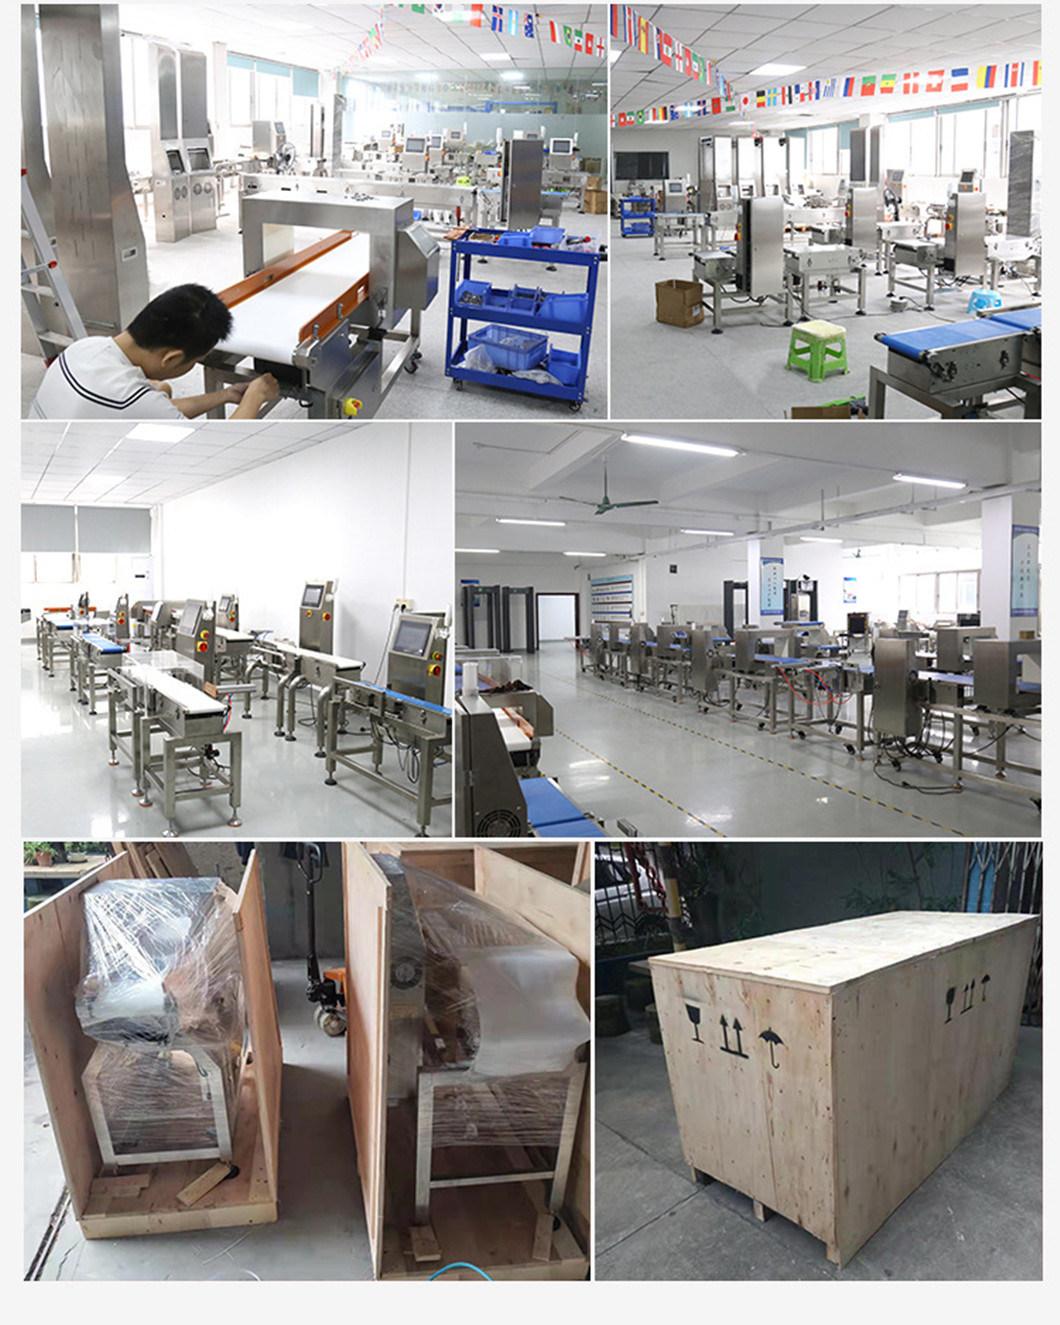 Automatic Stainless Steel Frame Check Weigher Checkweigher Factory Price